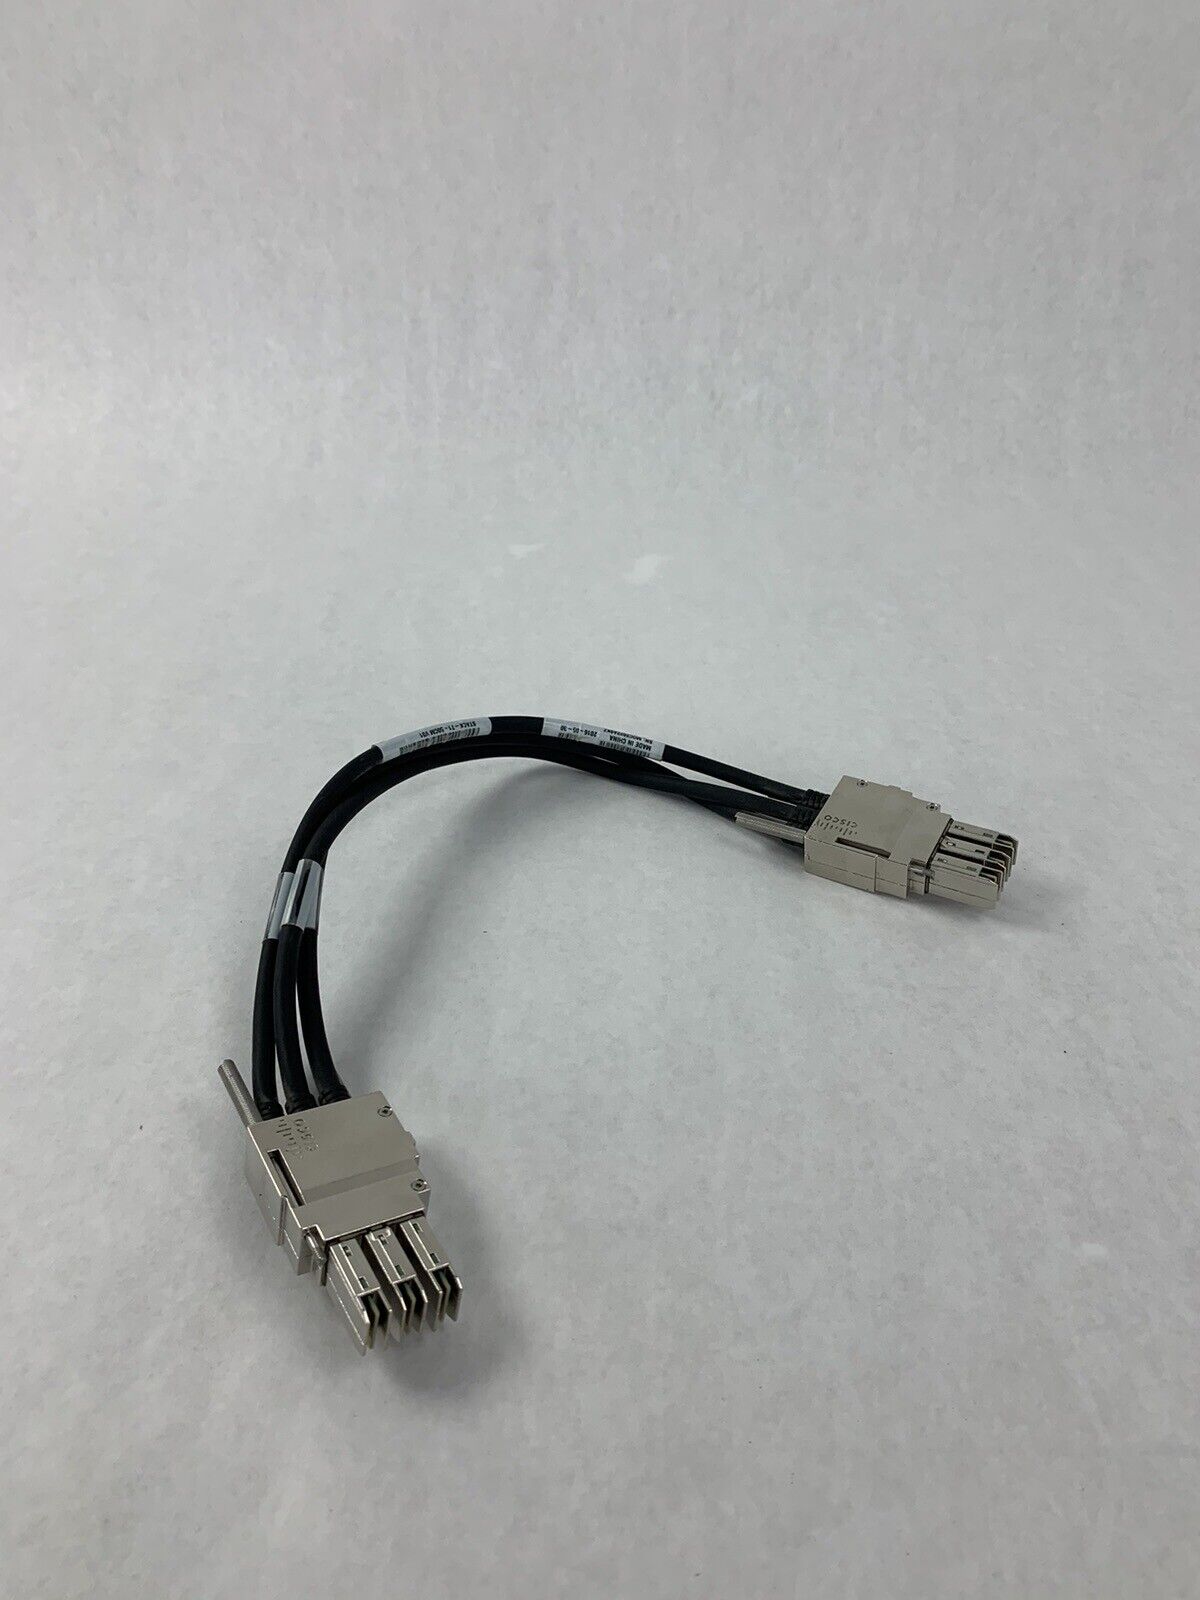 Cisco STACK-T1-50CM V01 0.5m Stacking Cable 800-40403-01 91223